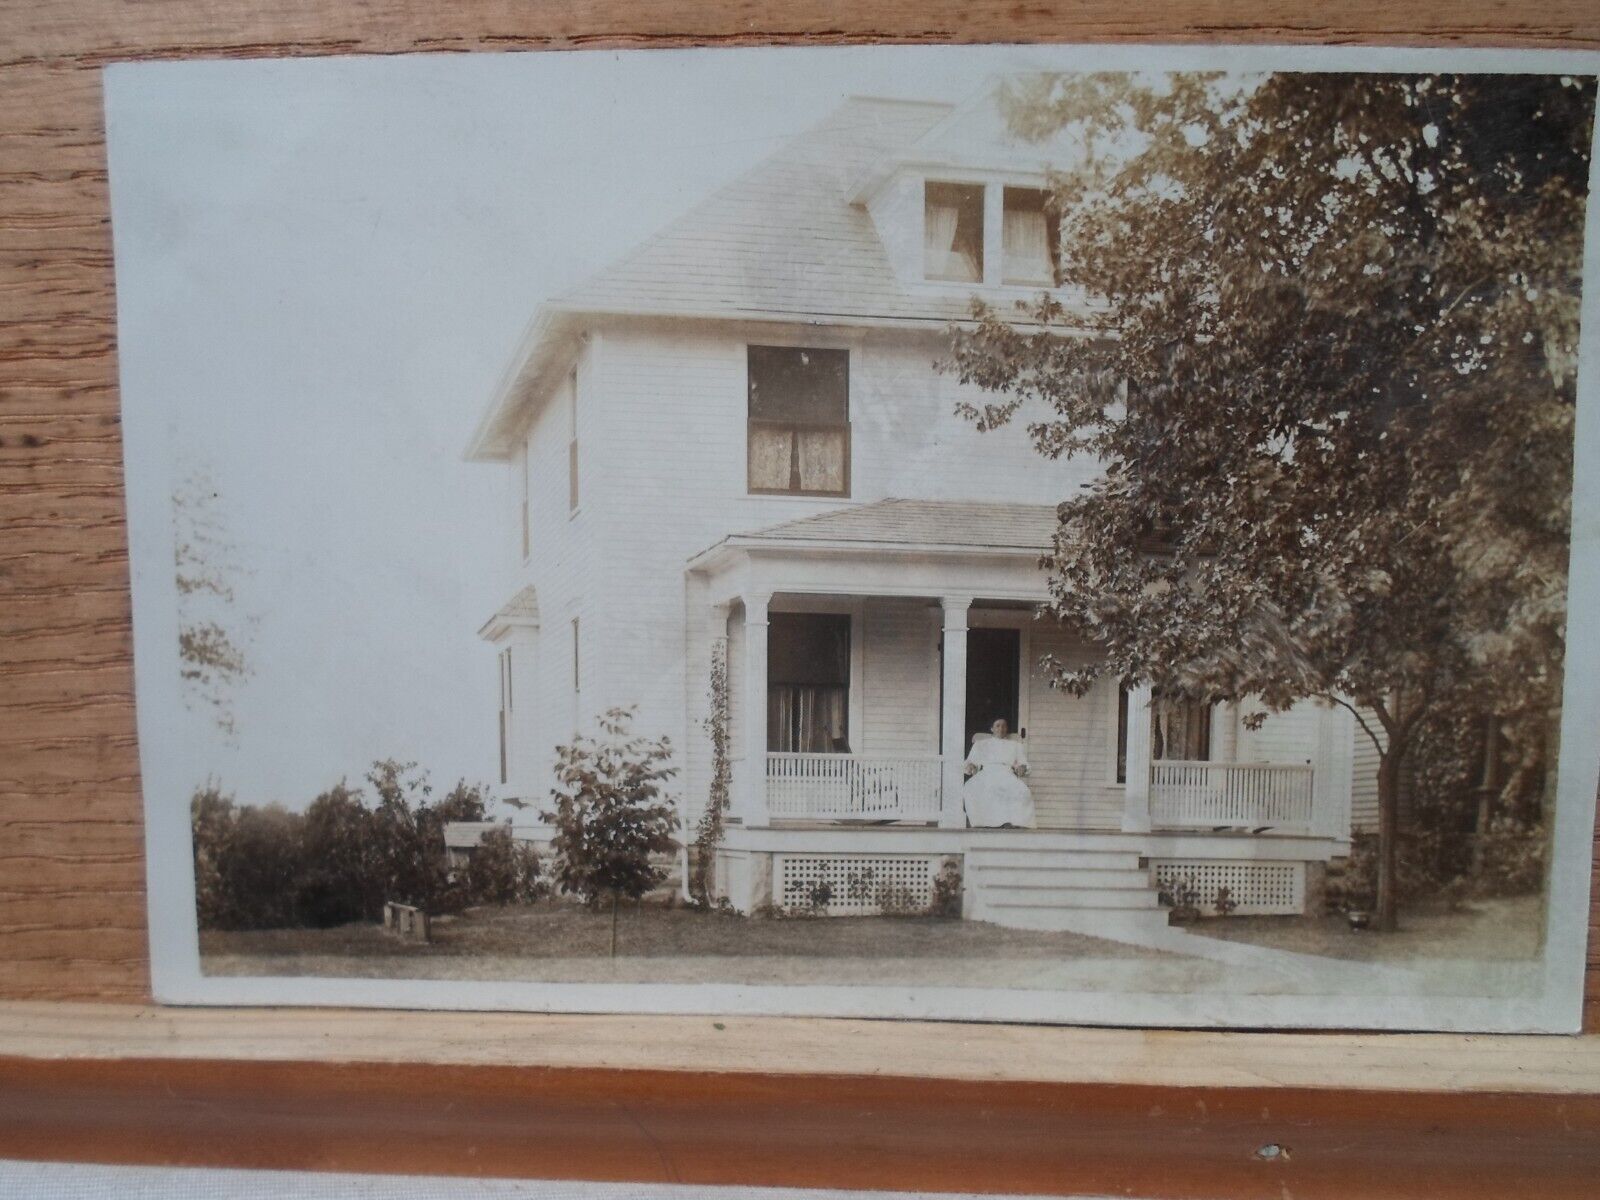 Mansfield Oh Ohio, real photo of house, early postcard  # 2